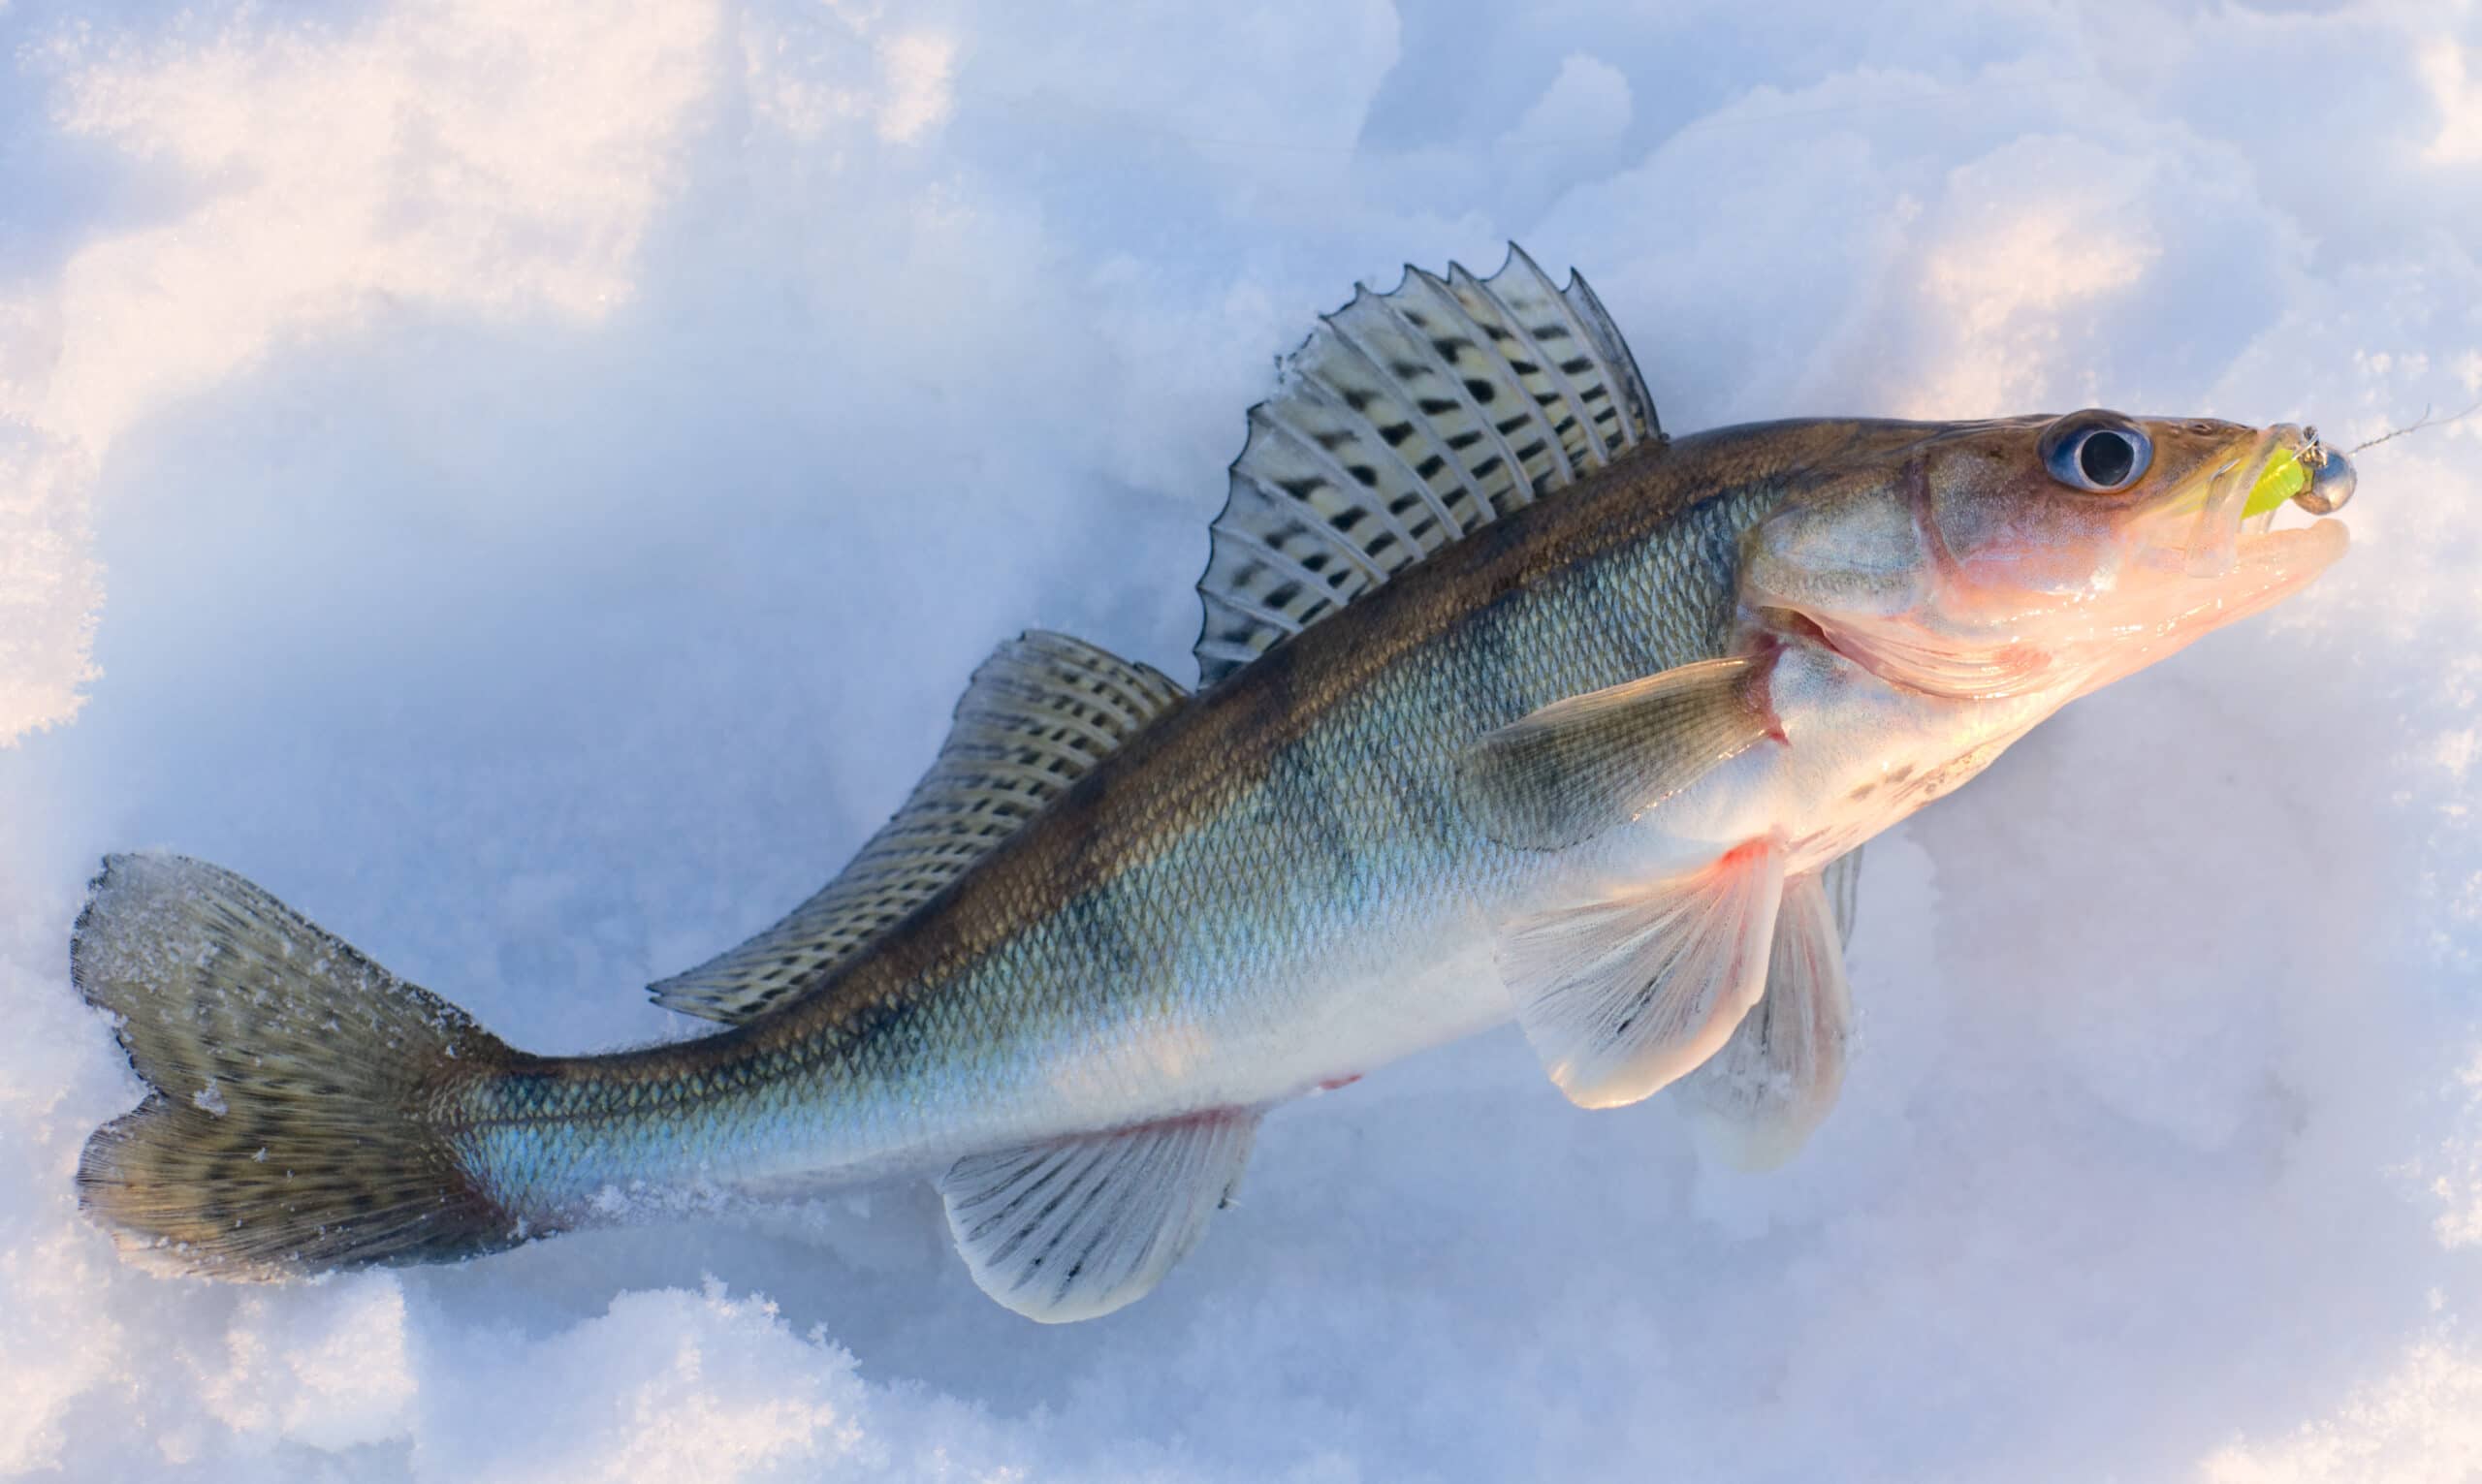 Walleye caught on jig lure is lying on snow in last rays of sunlight, released after shooting